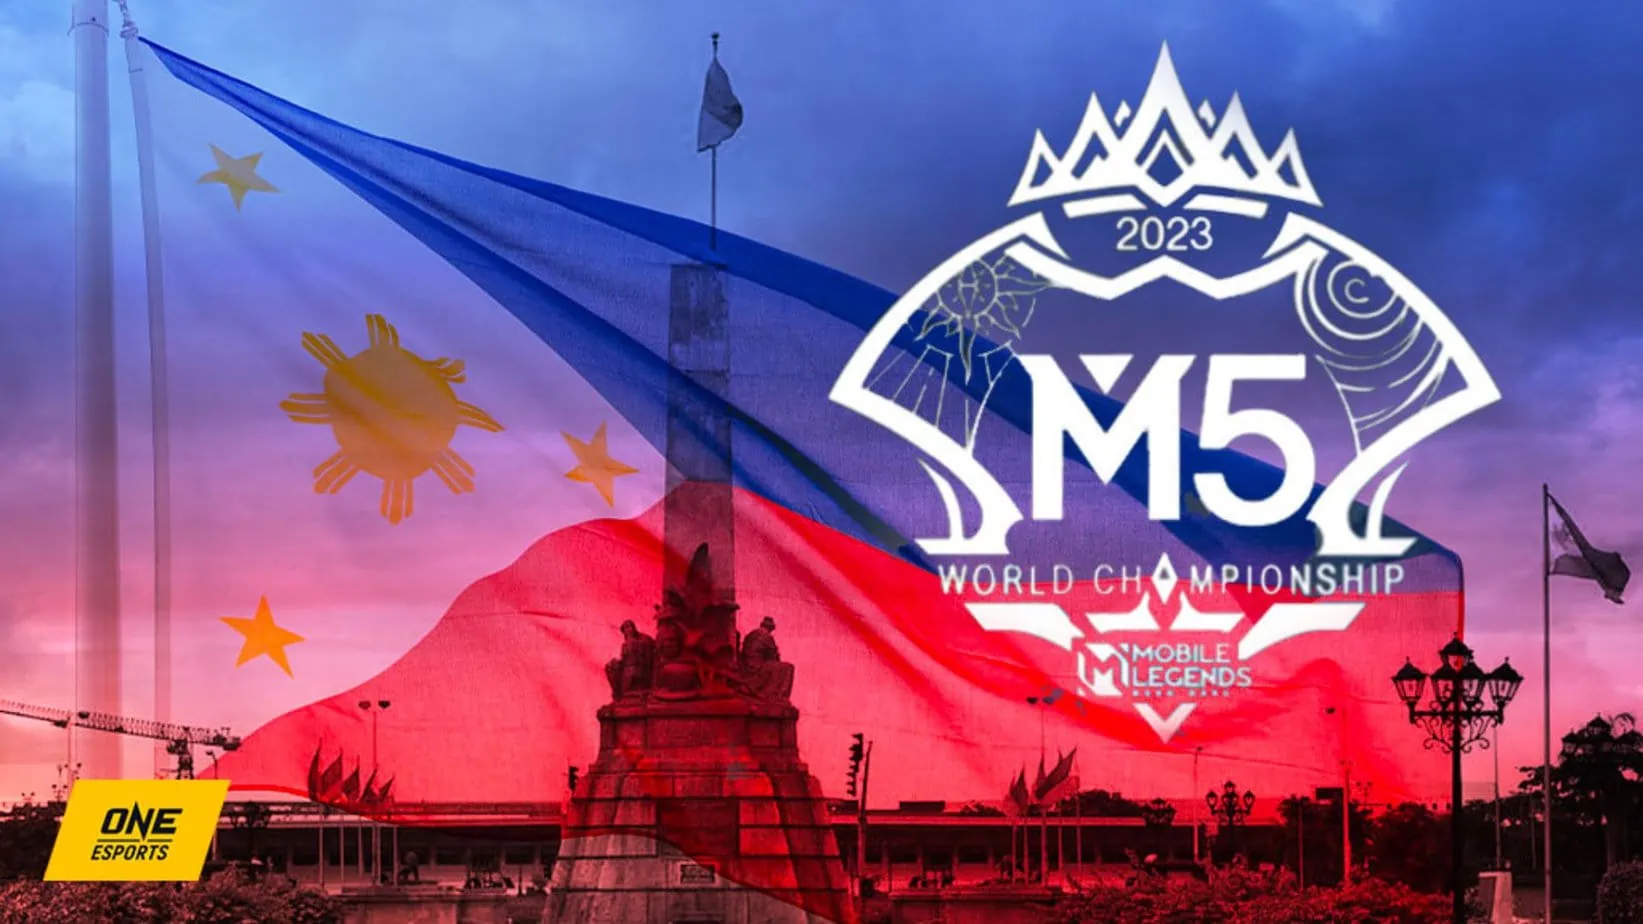 Mabuhay! M5 World Championship will be in the Philippines ONE Esports